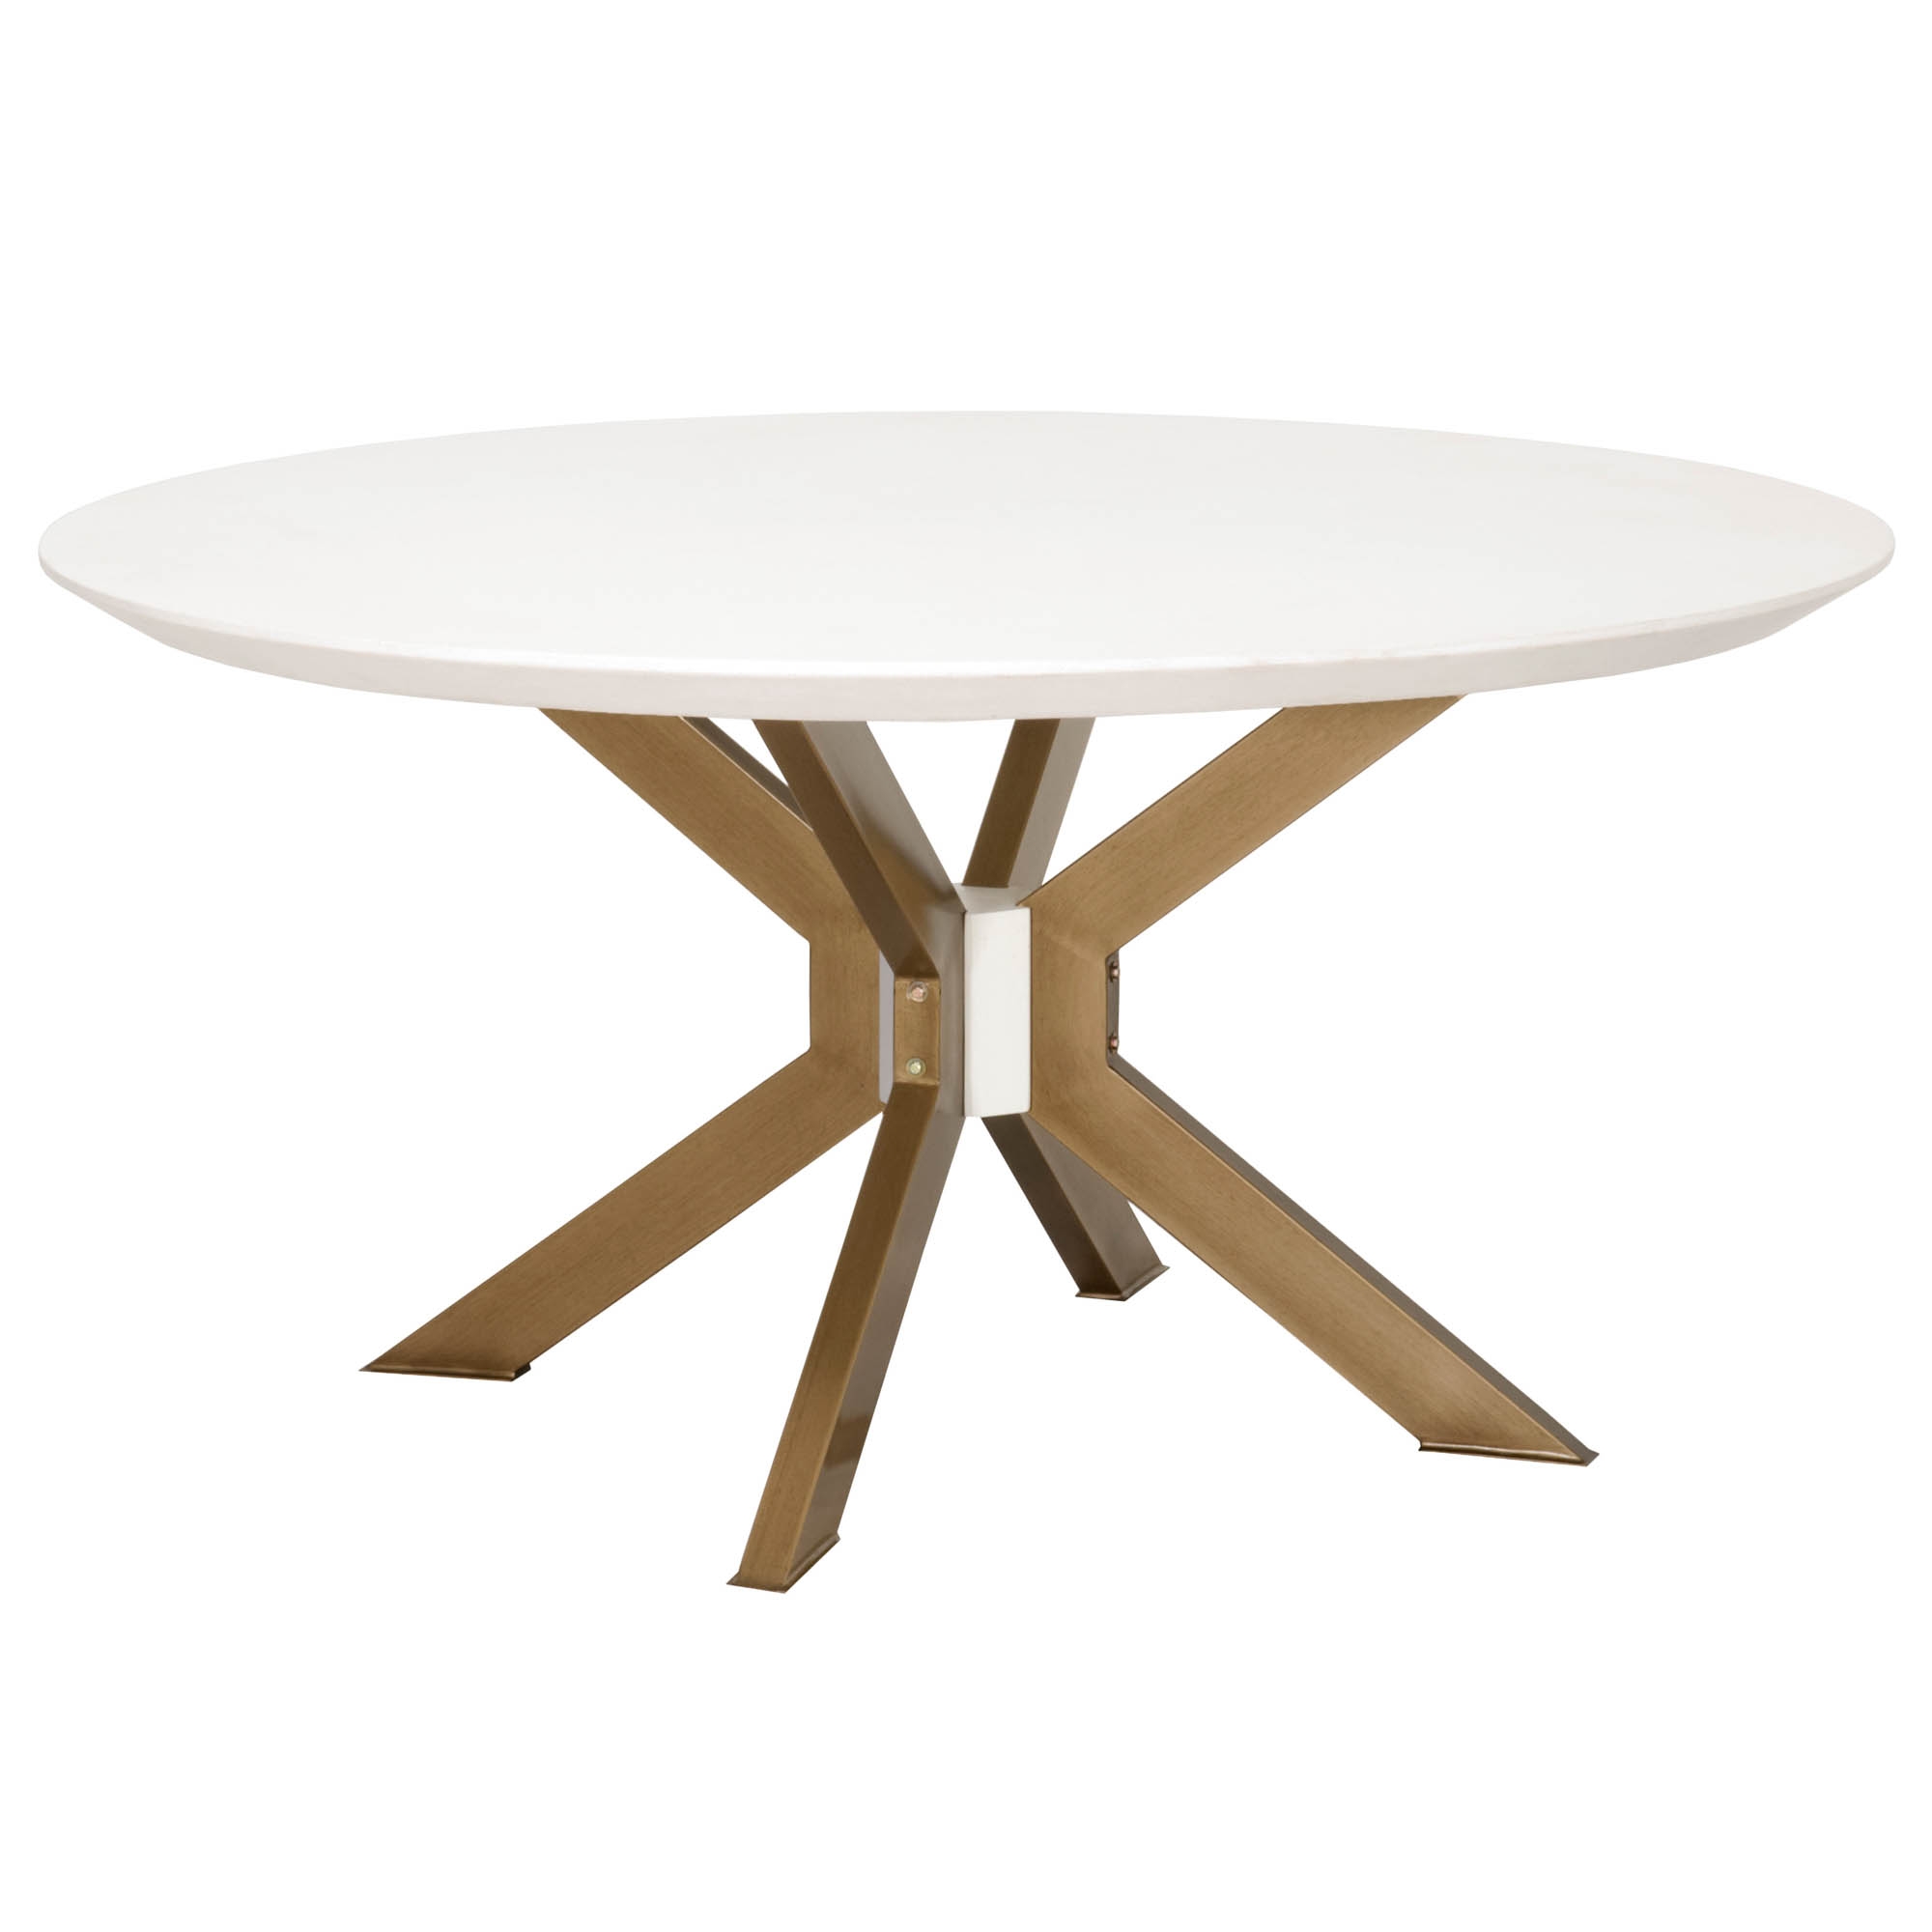 Industry 60" Round Dining Table - Image 1